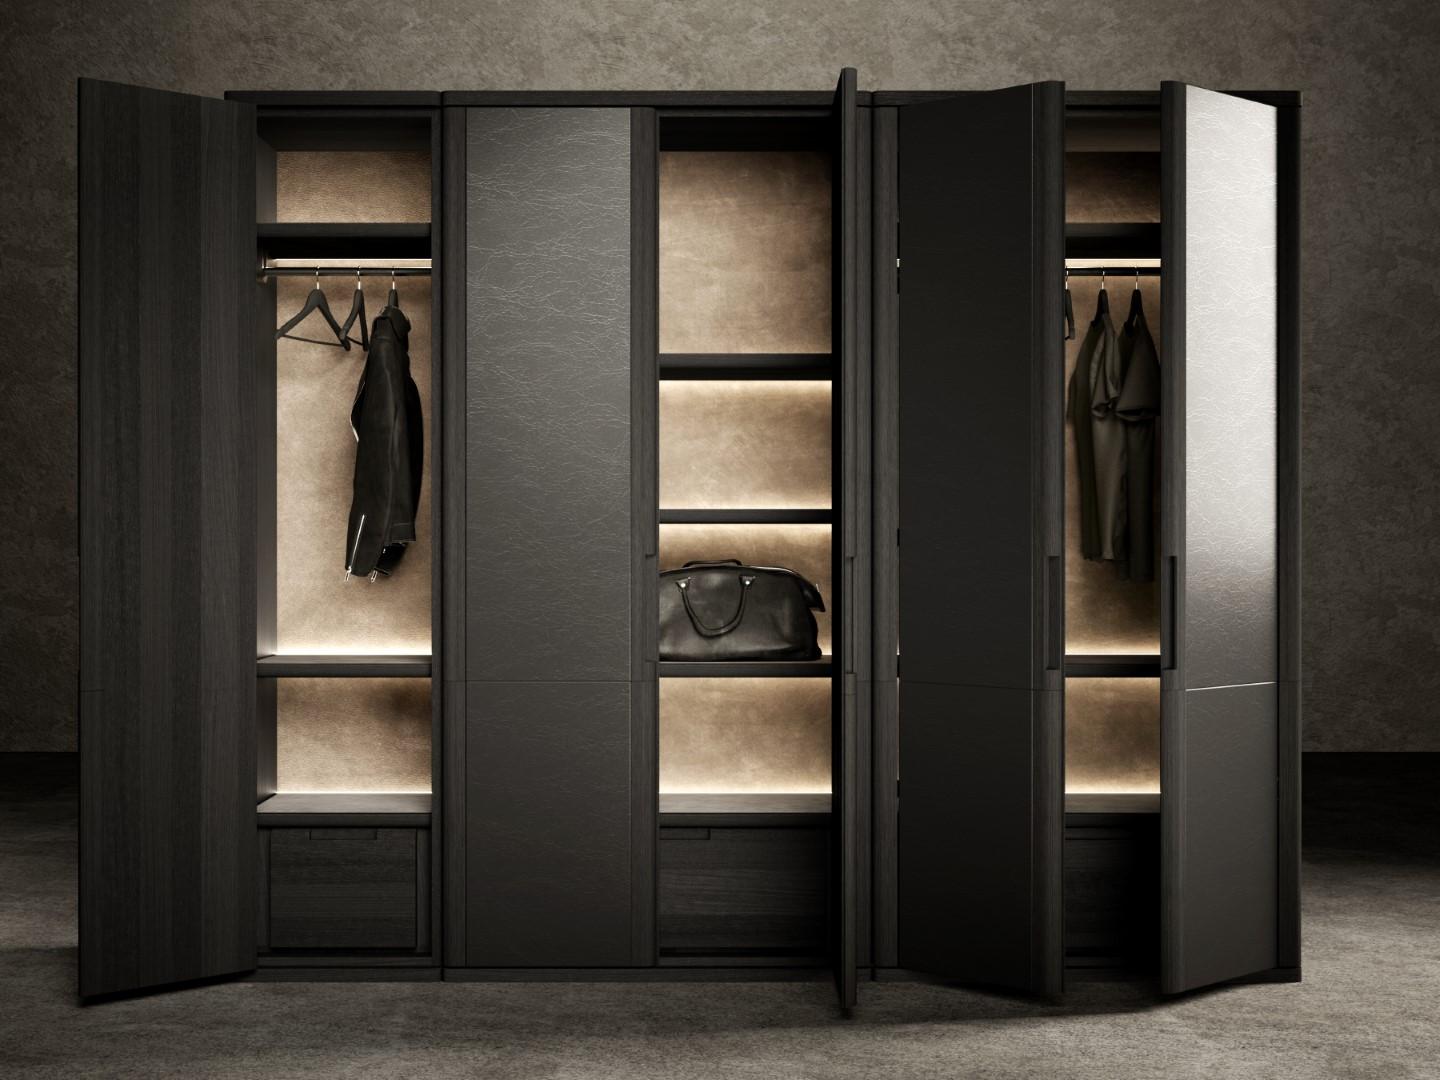 The Vittorio wardrobe is a modular storage unit, available in two versions, 60 cm and 120 cm wide, which can be placed side by side.
The structure in sandblasted black ash wood is entirely customisable, starting from the doors that can be covered in